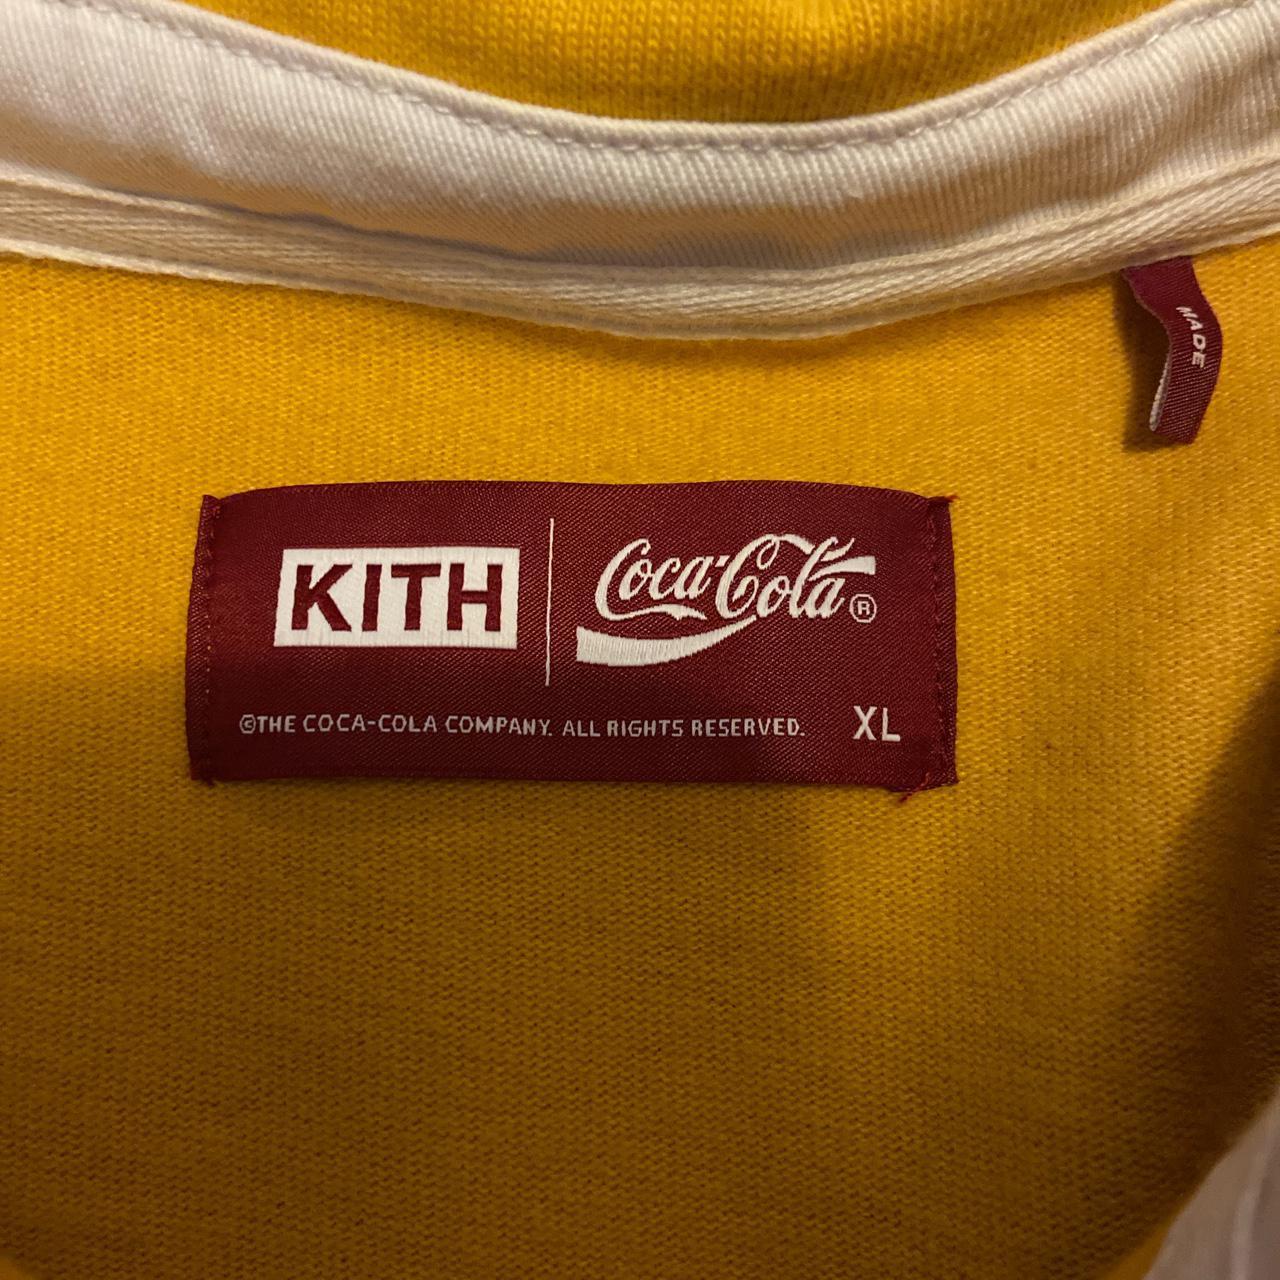 Kith X Coca-Cola Rugby shirt